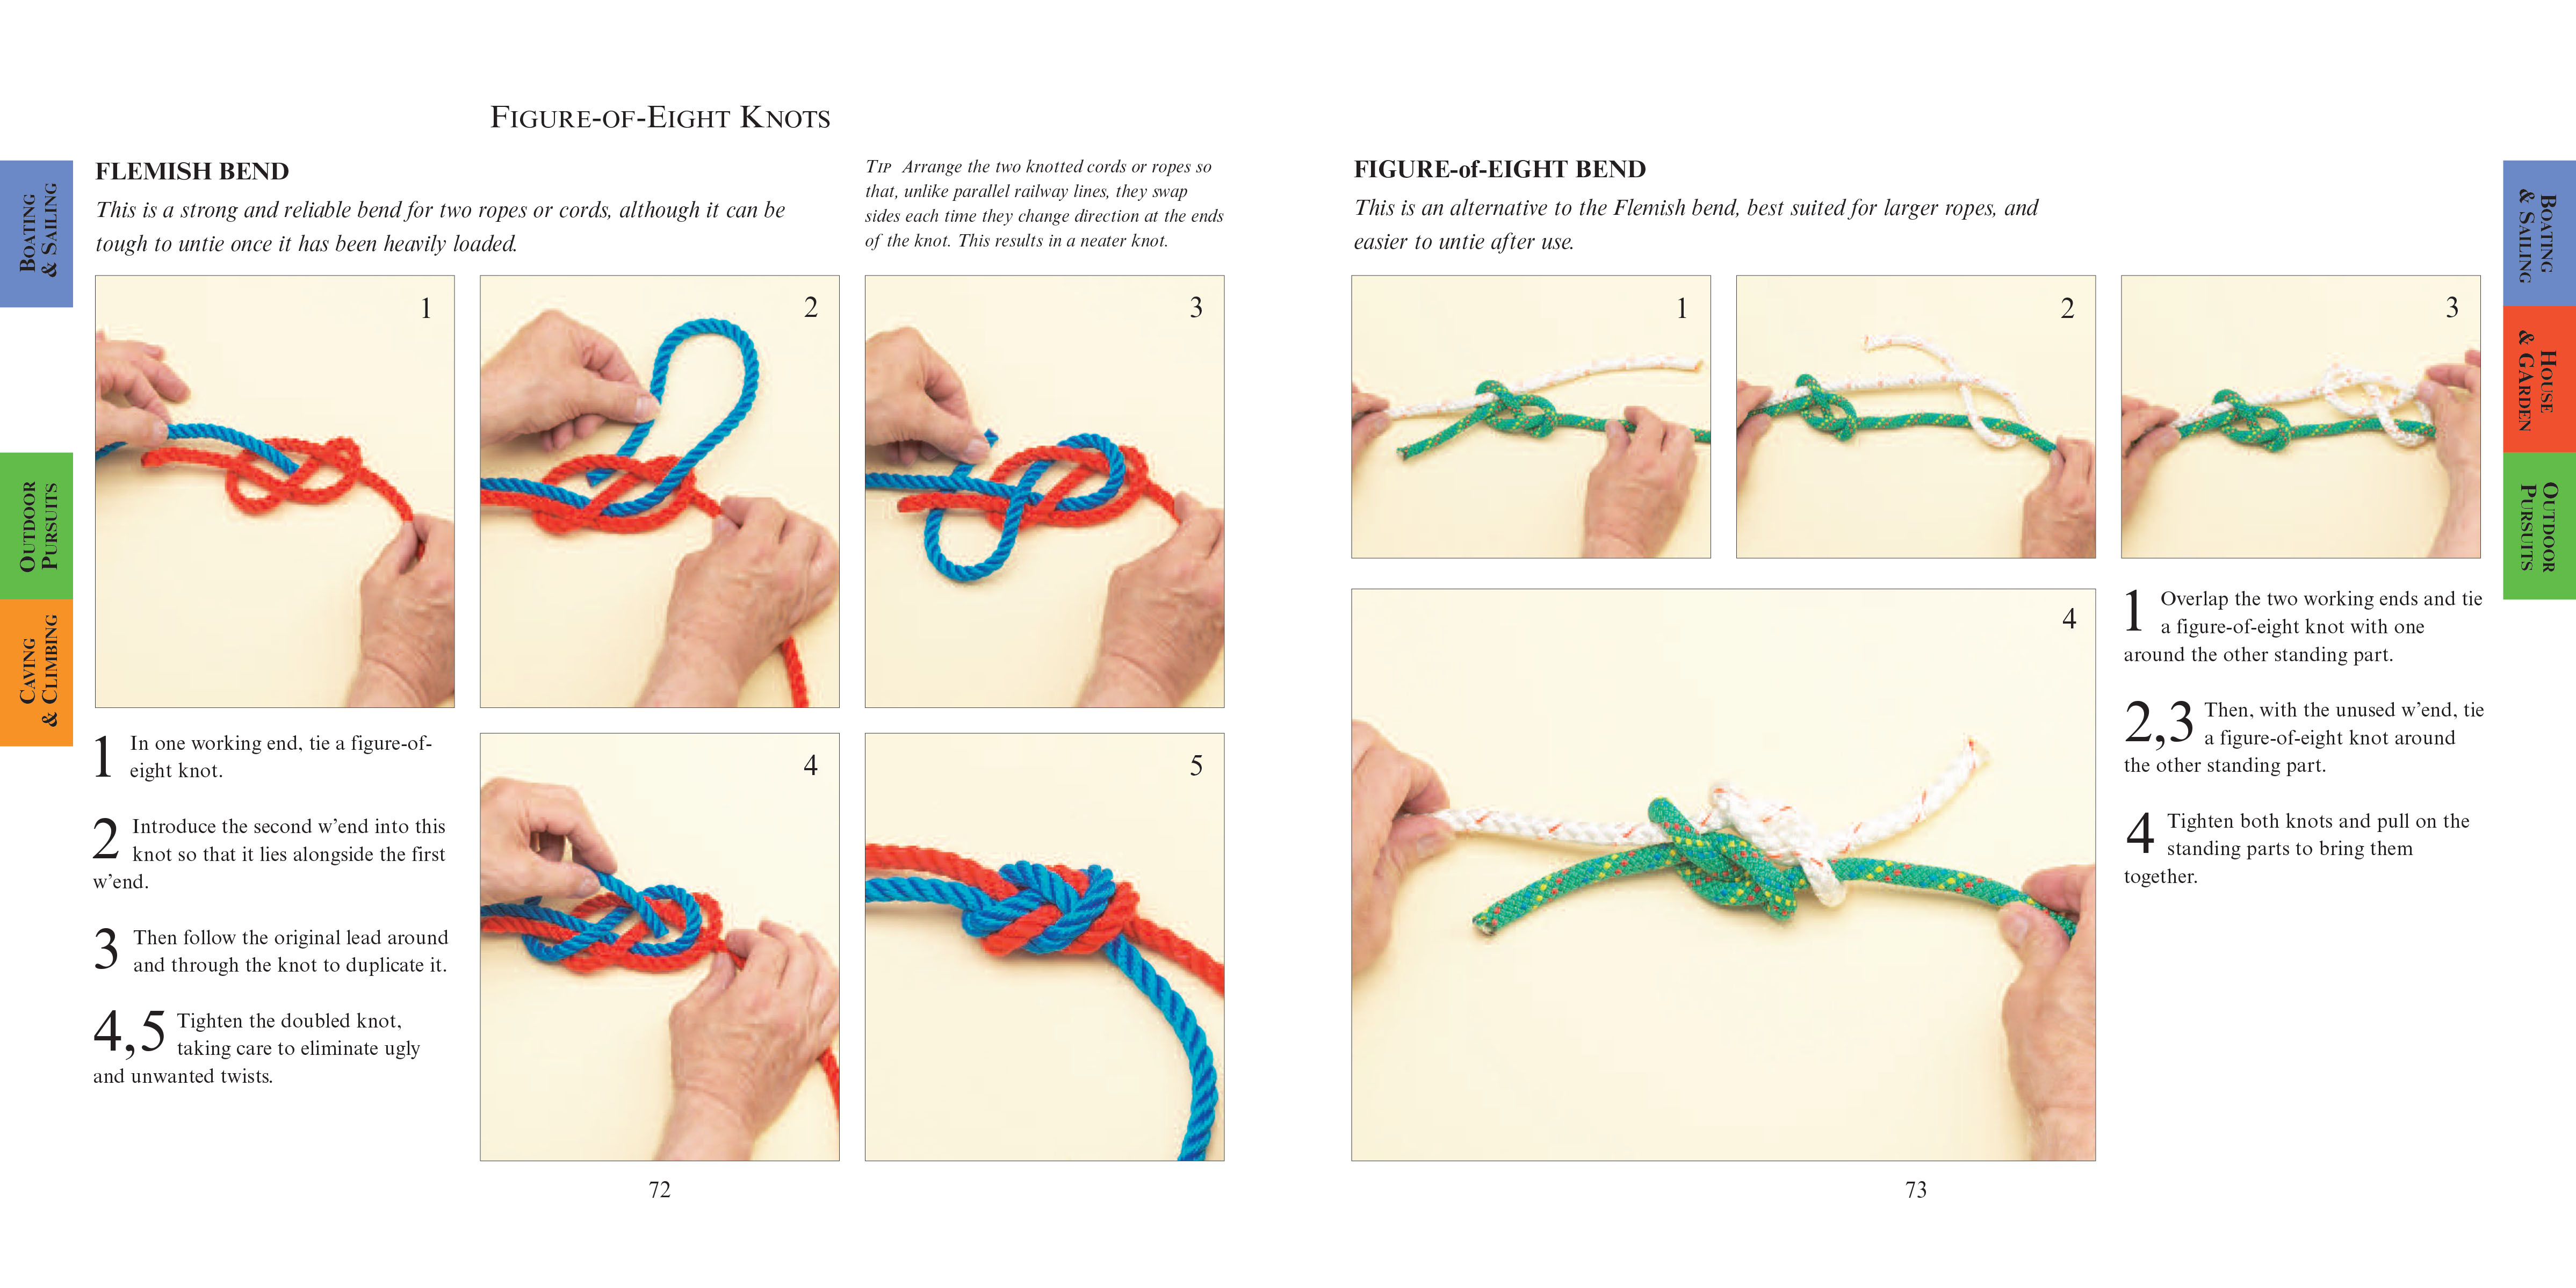 The Handy Book of Knots